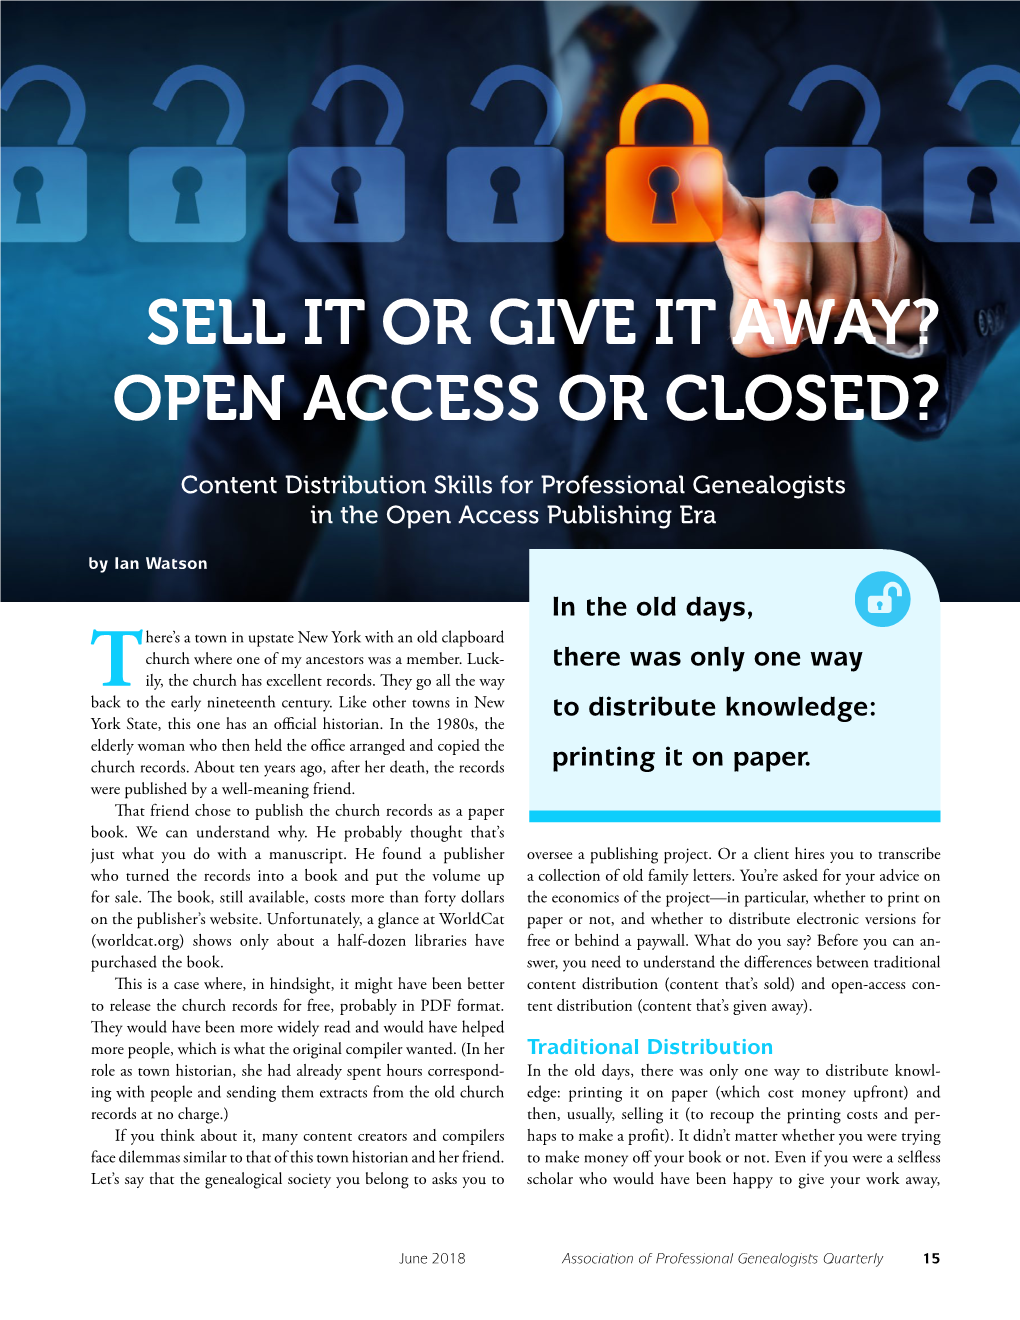 Sell It Or Give It Away? Open Access Or Closed?